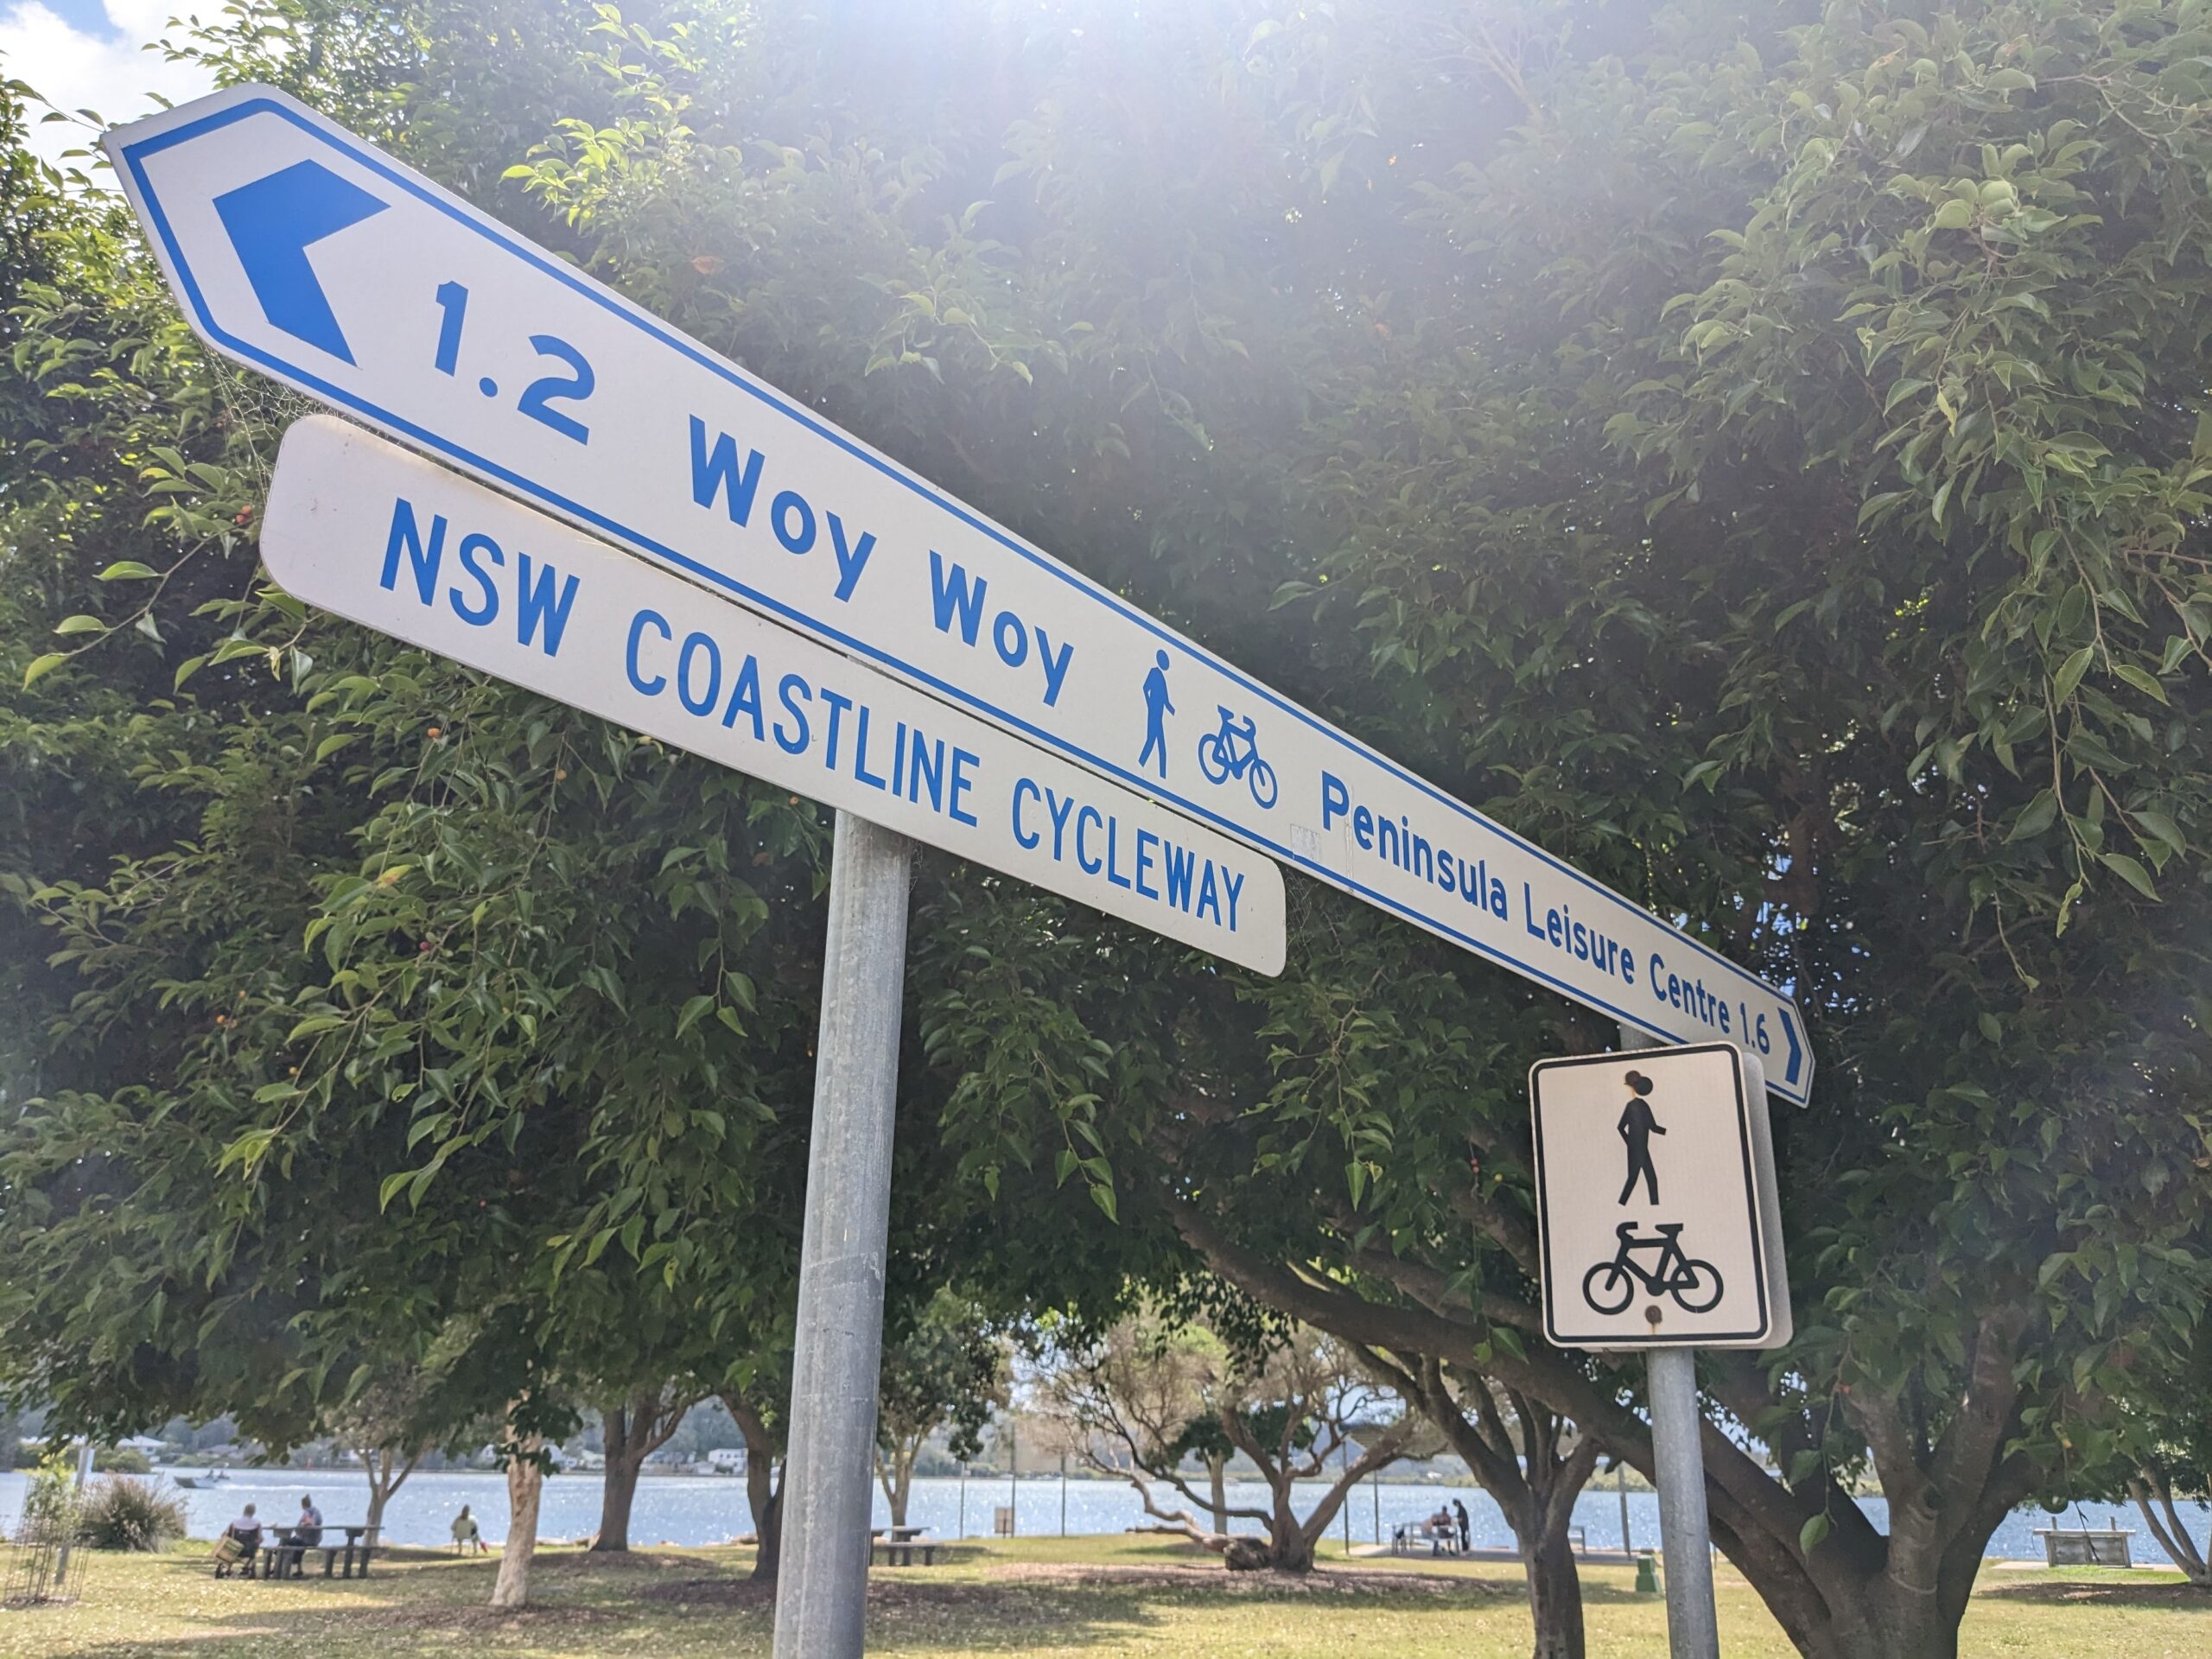 A signpost on the New South Wales Coastline Cycleway, aka: Coast Cycle Trail.